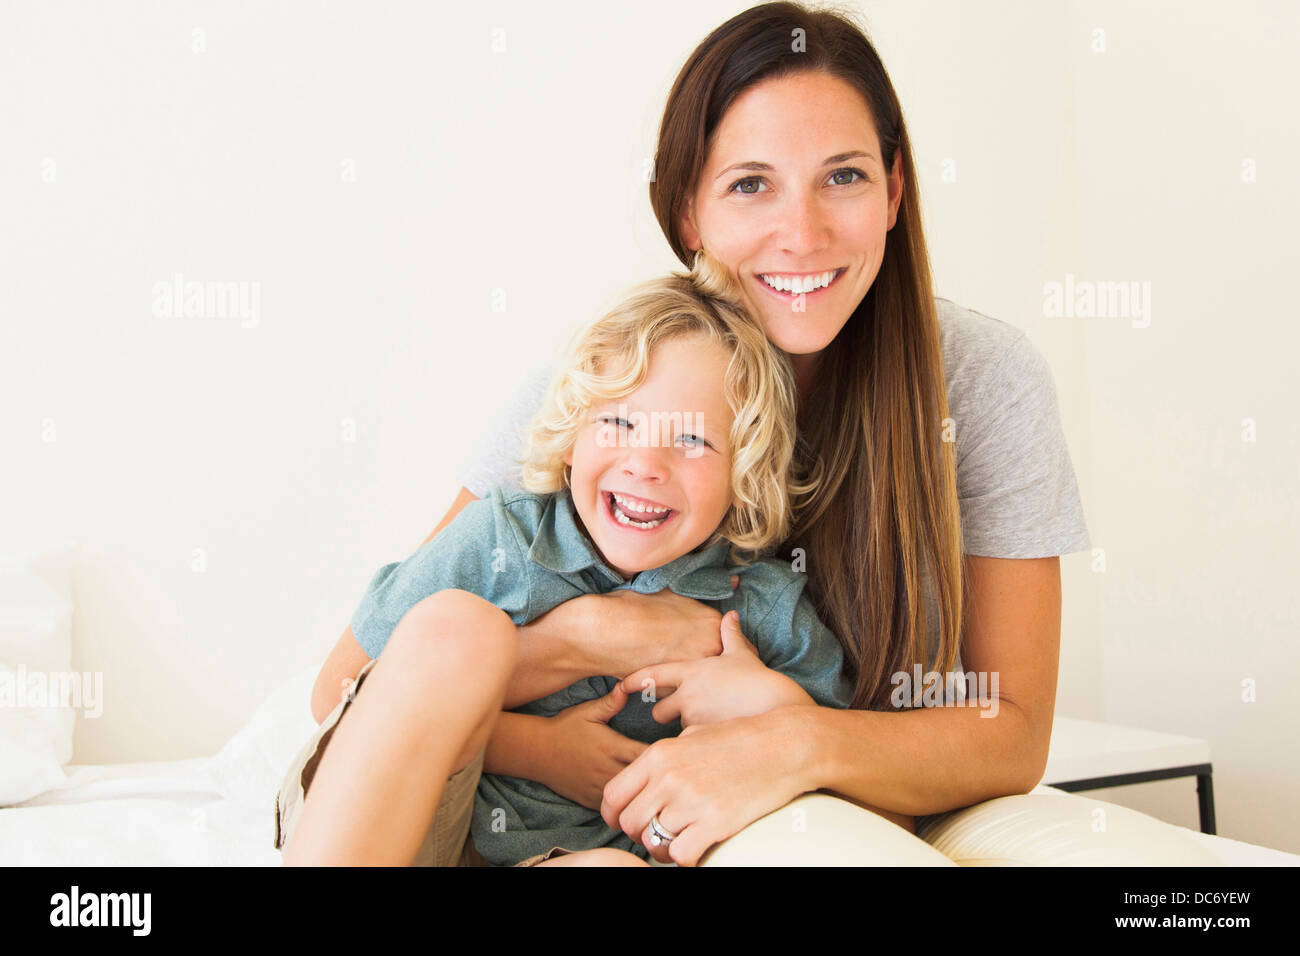 Portrait of mother with son (6-7) Stock Photo